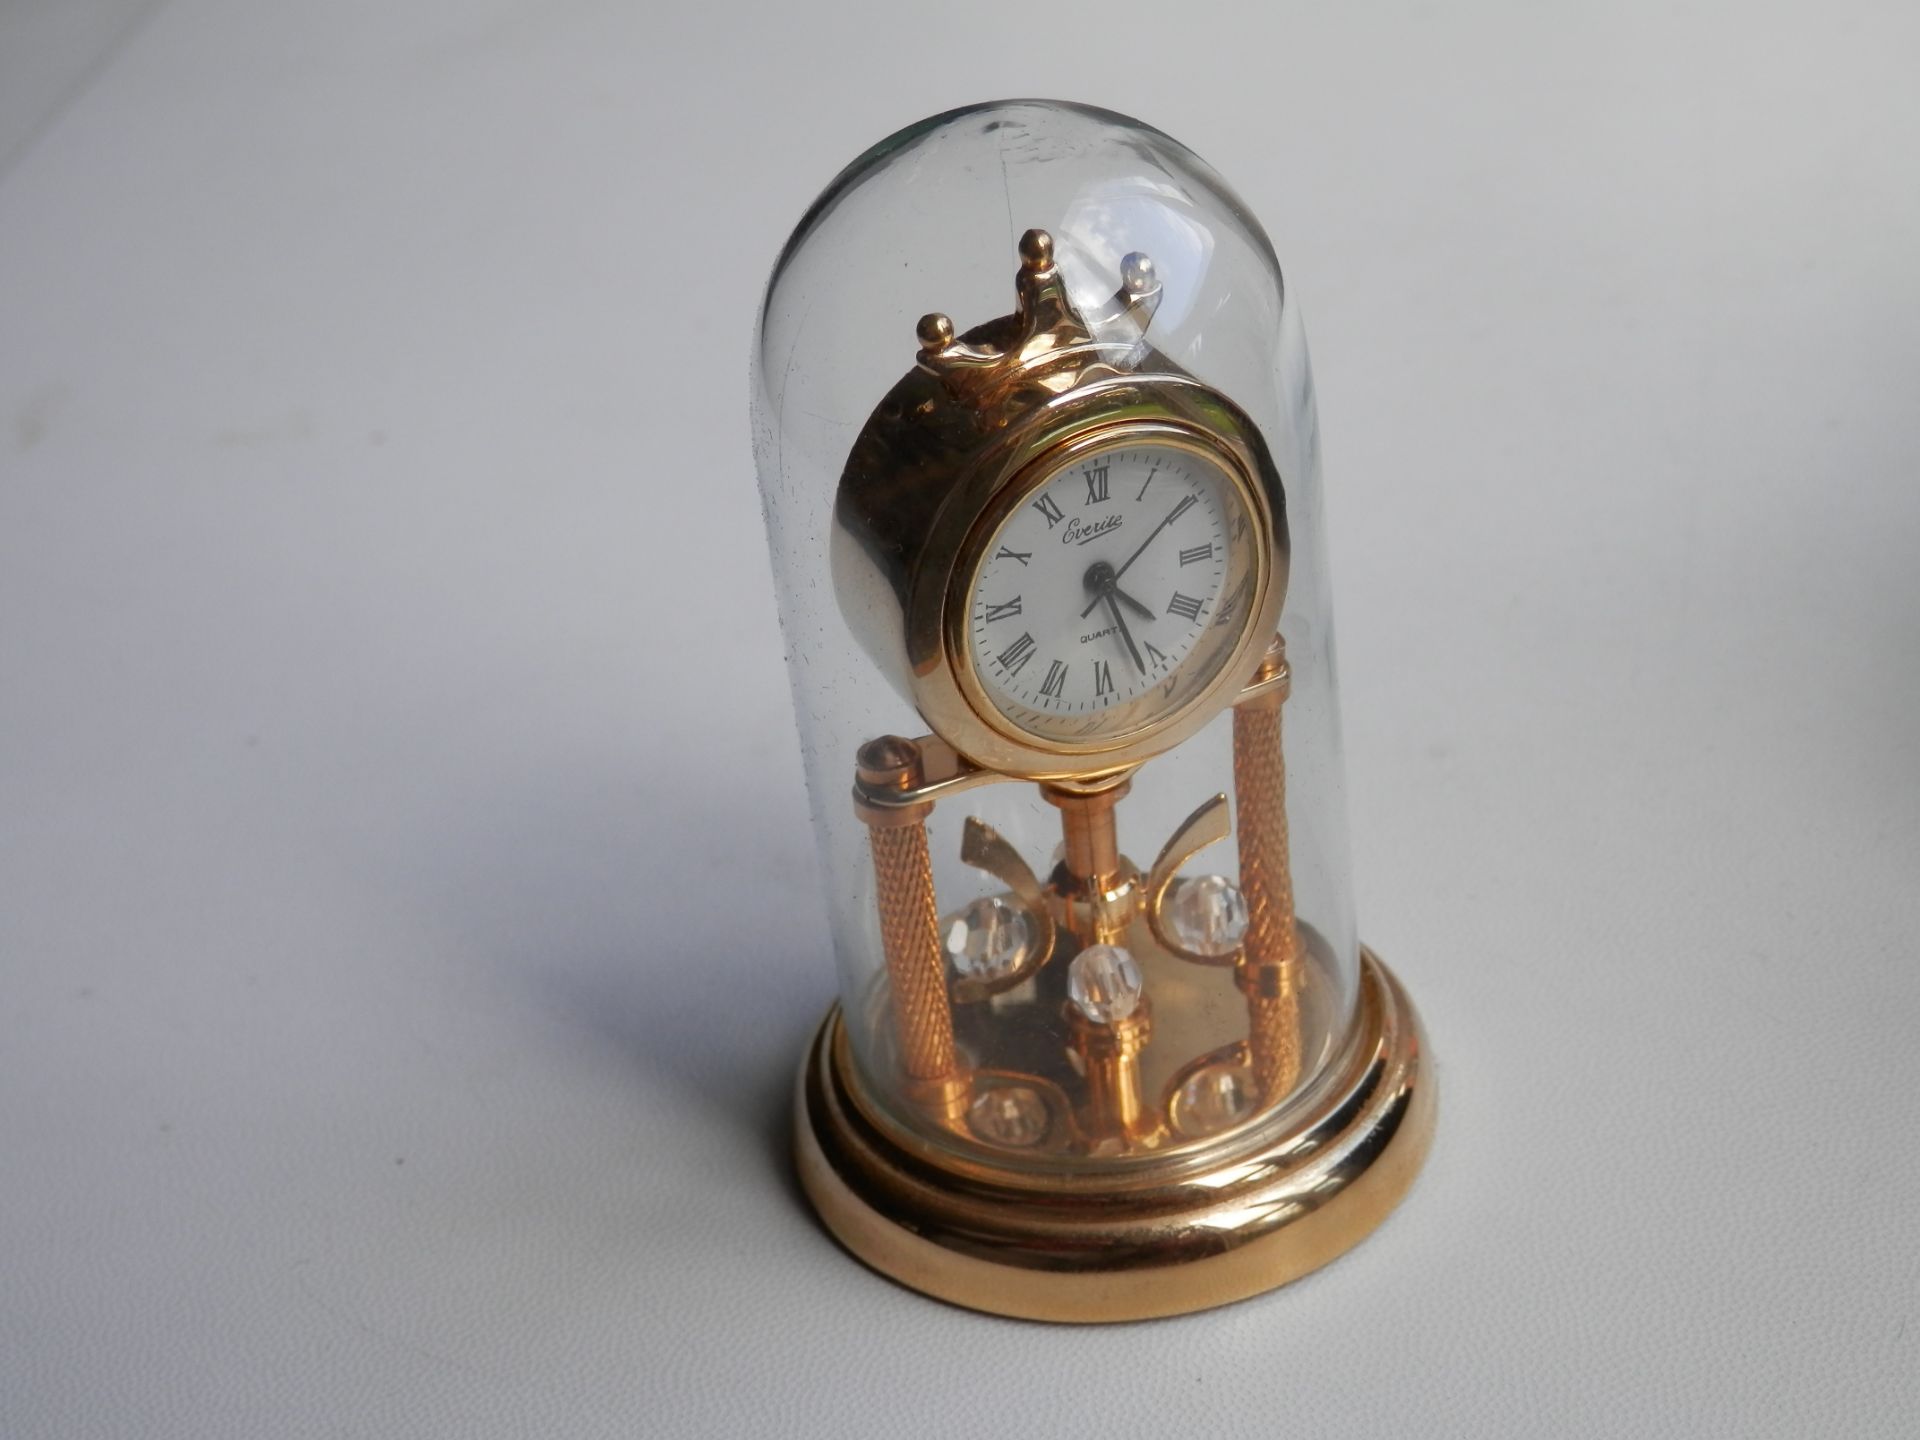 LOVELY 3" EVERITE WORKING BRASS ANNIVERSARY QUARTZ MINIATURE CLOCK WITH GLASS DOME & CASE.